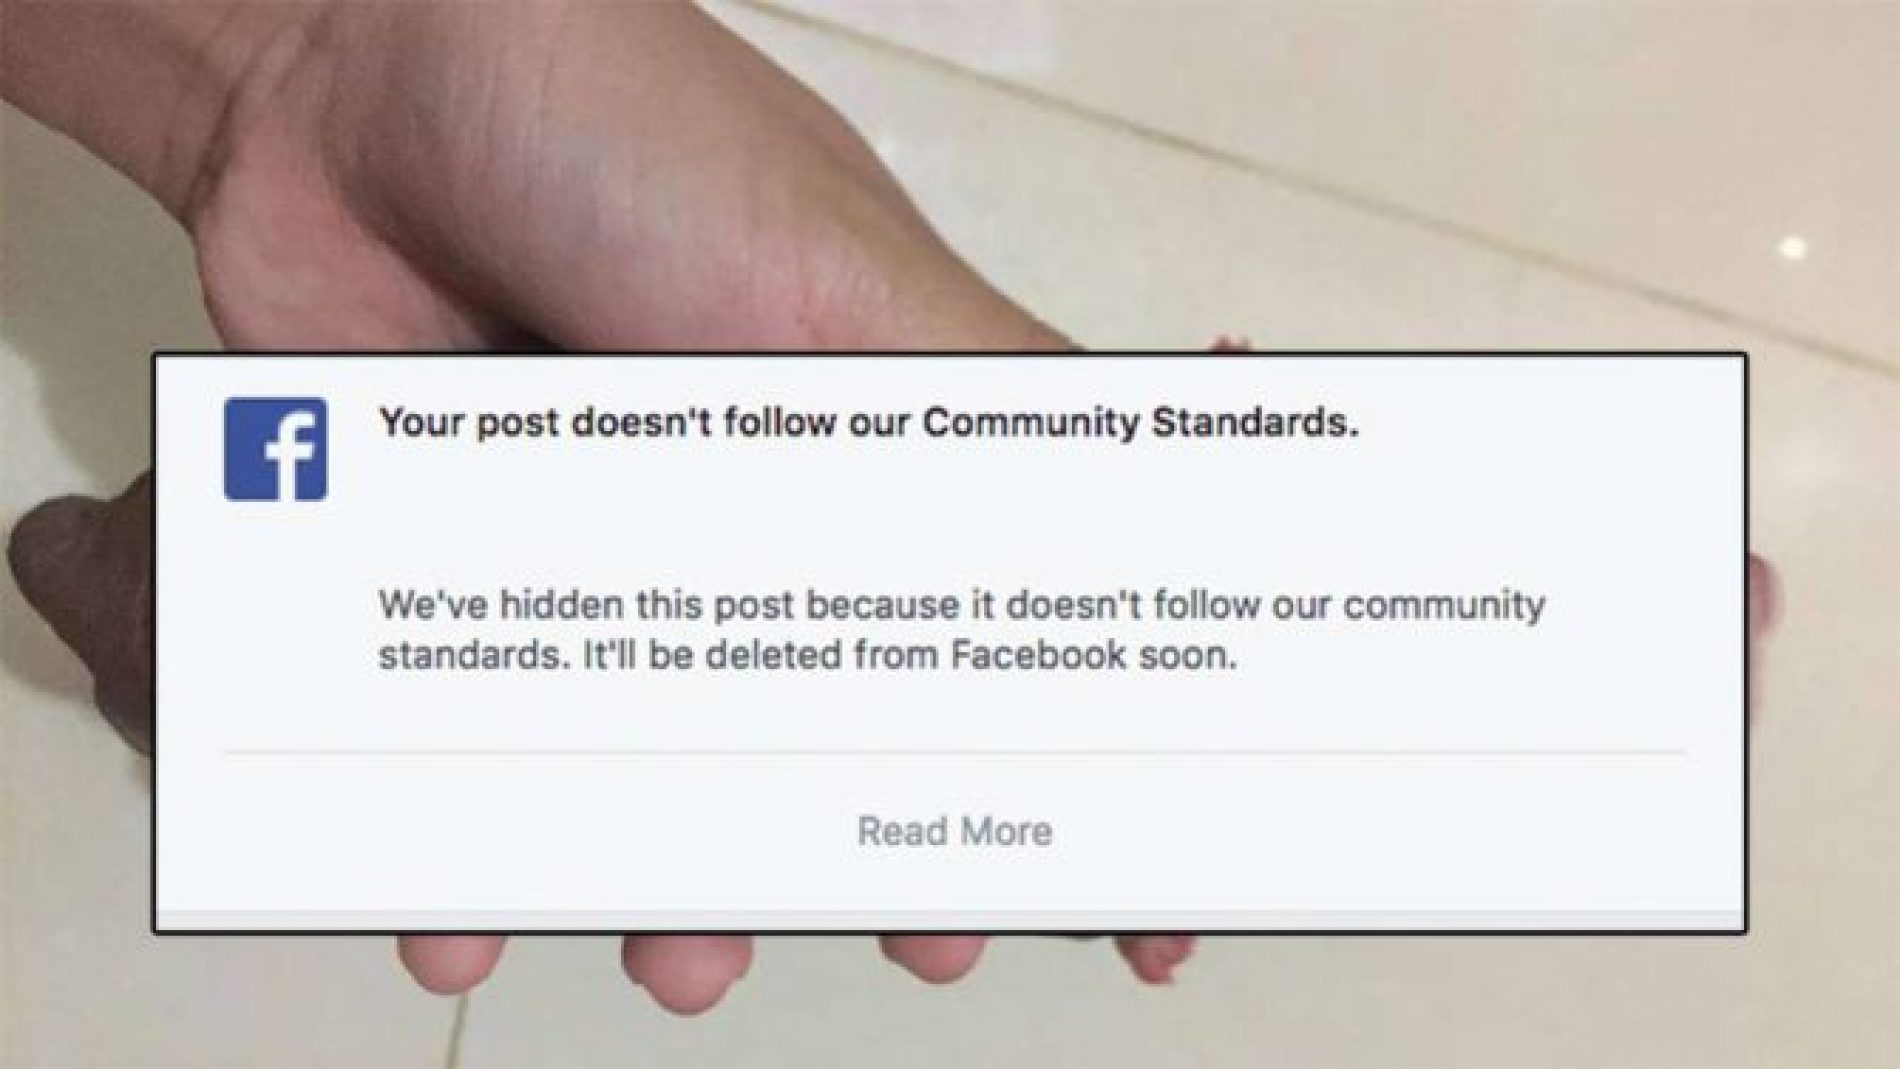 Facebook bans user’s puppy photo, and it’s all just a hilarious misunderstanding